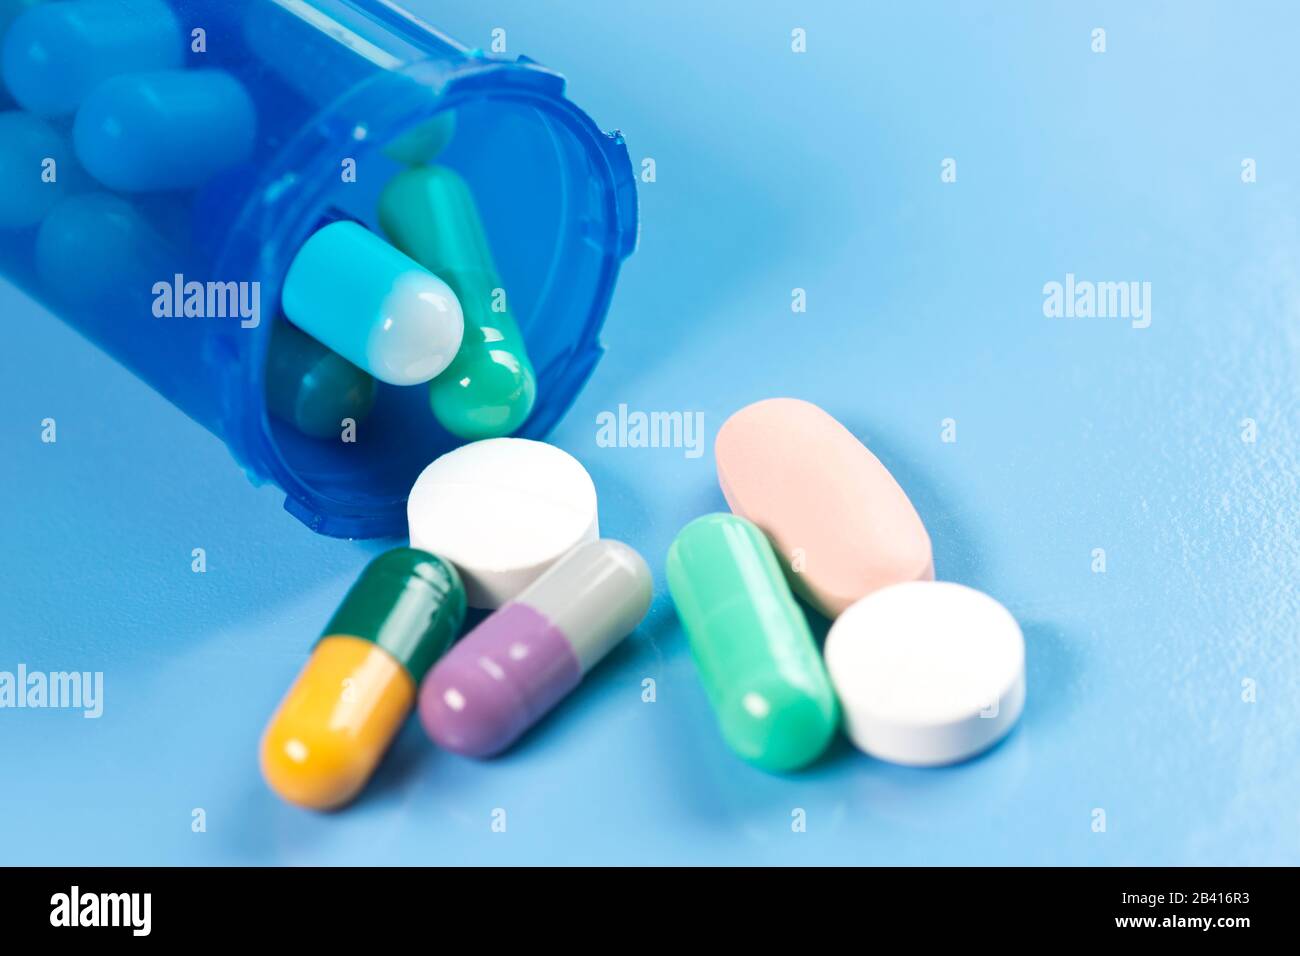 Colorful capsule and tablets spill from blue prescription container on blue background. Stock Photo